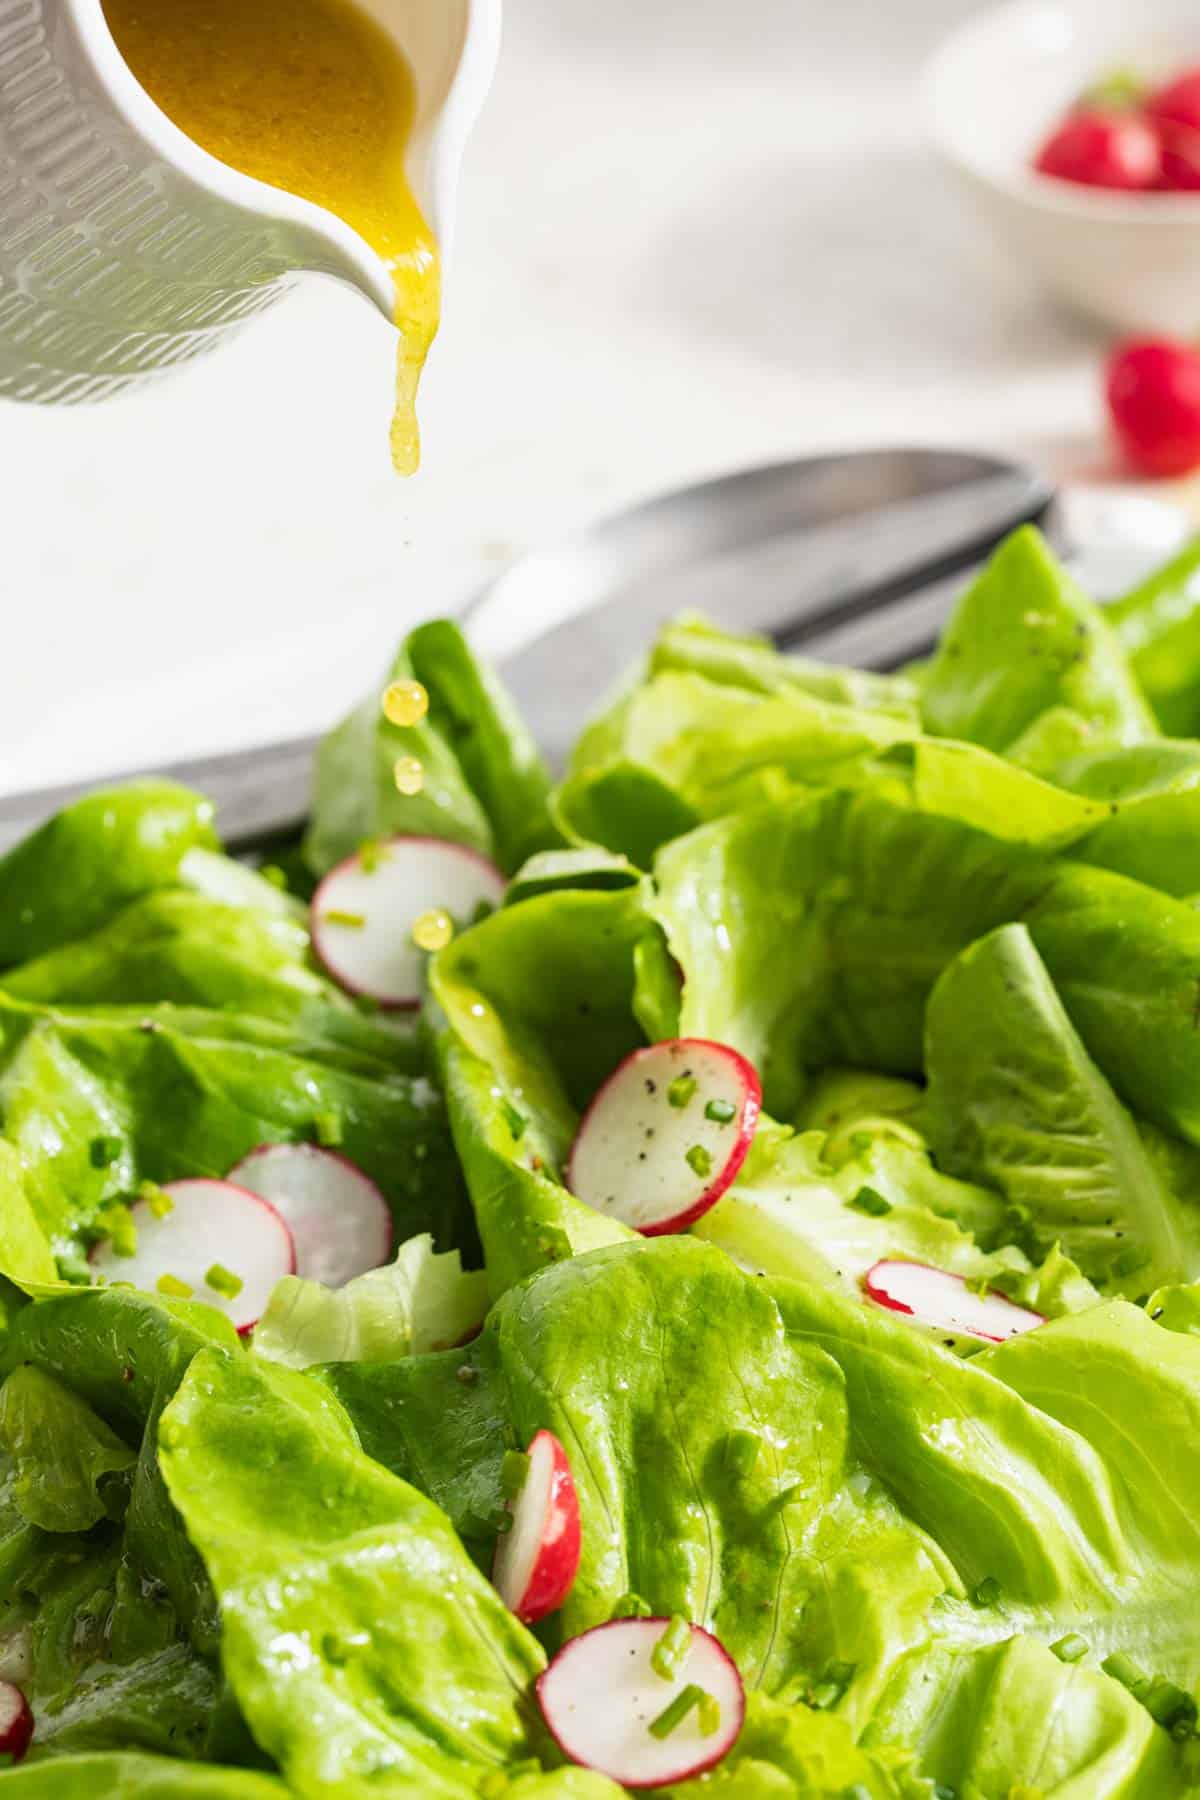 Pouring dijon dressing on a side salad.